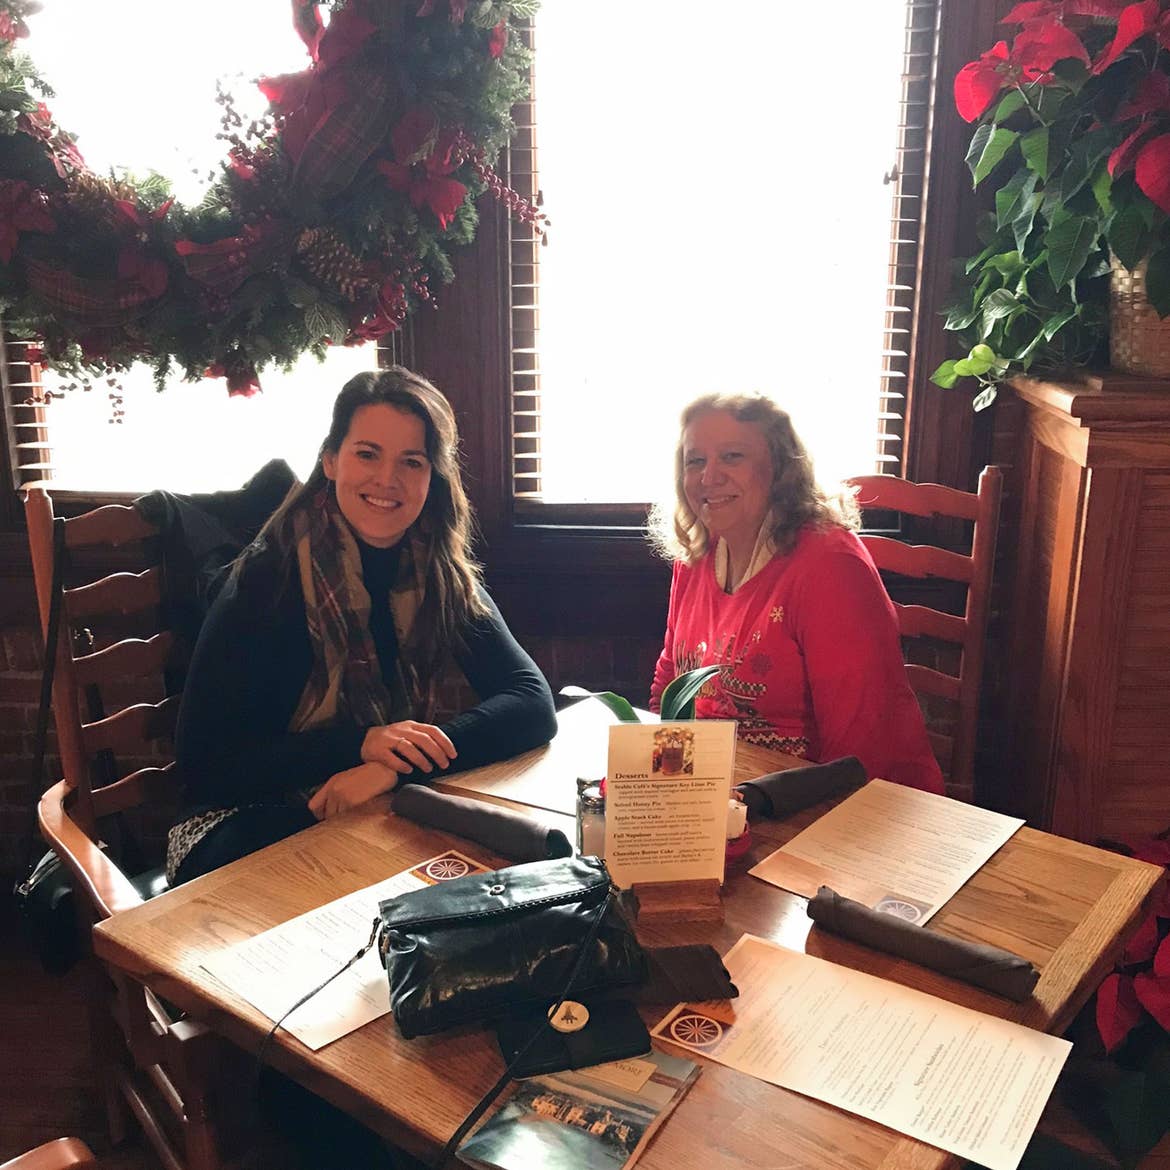 Author, Jenn C. Harmon (left), and her mother-in-law (right) seated near a table in front of a window while dining at the Stable Cafe.